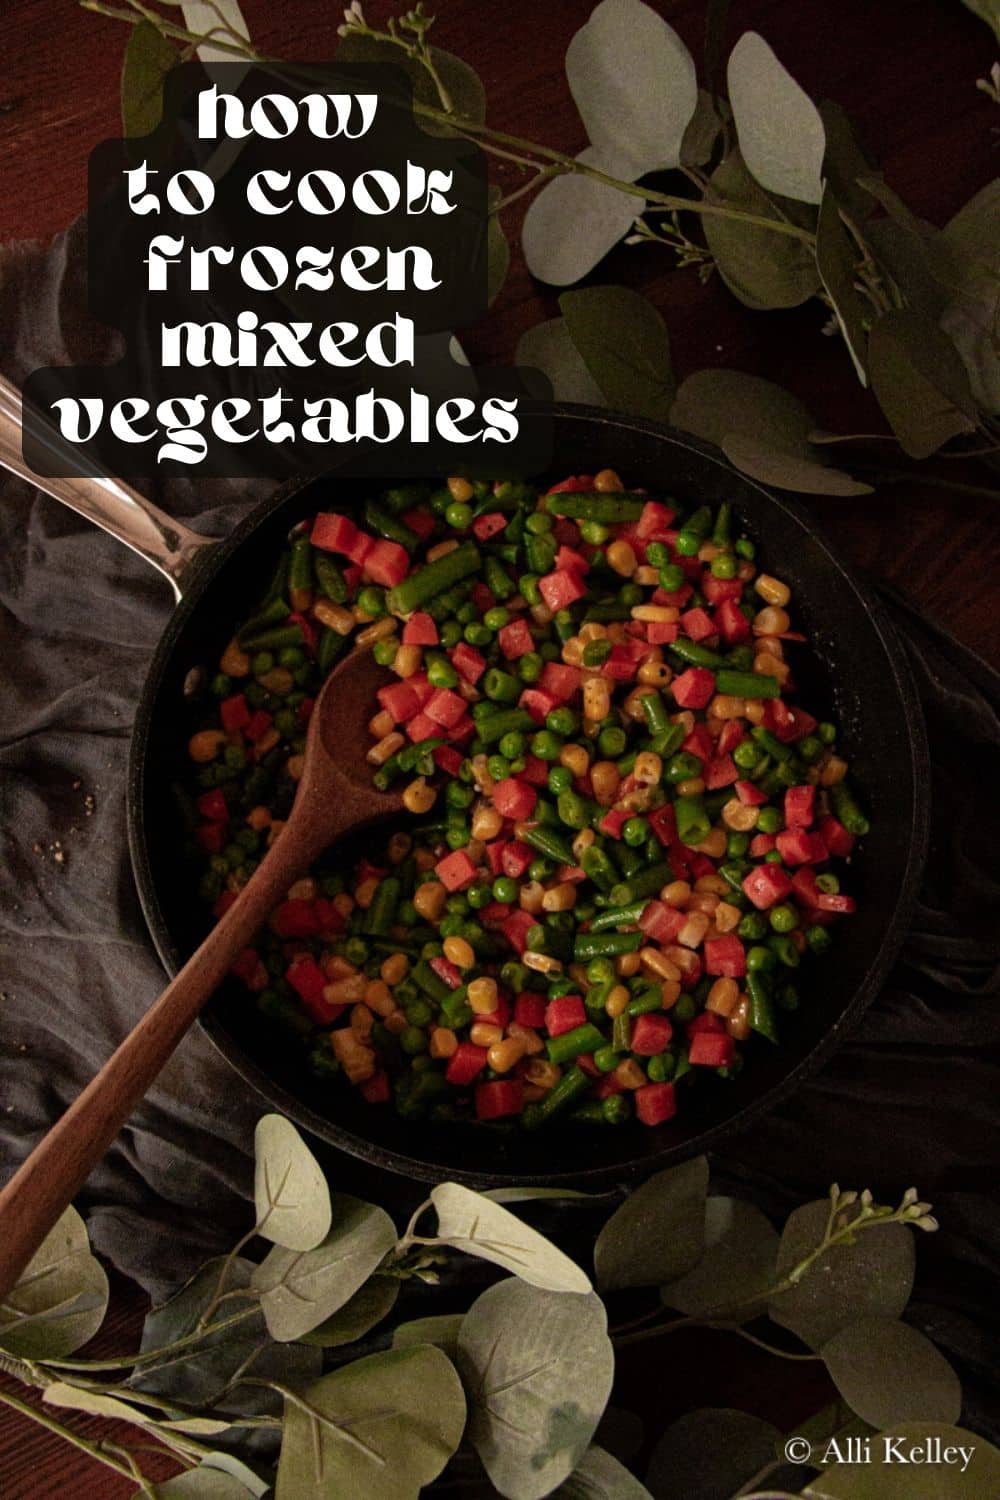 Take your frozen mixed vegetables to the next level with this simple recipe! Perfectly seasoned, full of flavor, and never soggy, you won’t go back to plain frozen vegetables again. No extra steps or special ingredients required!